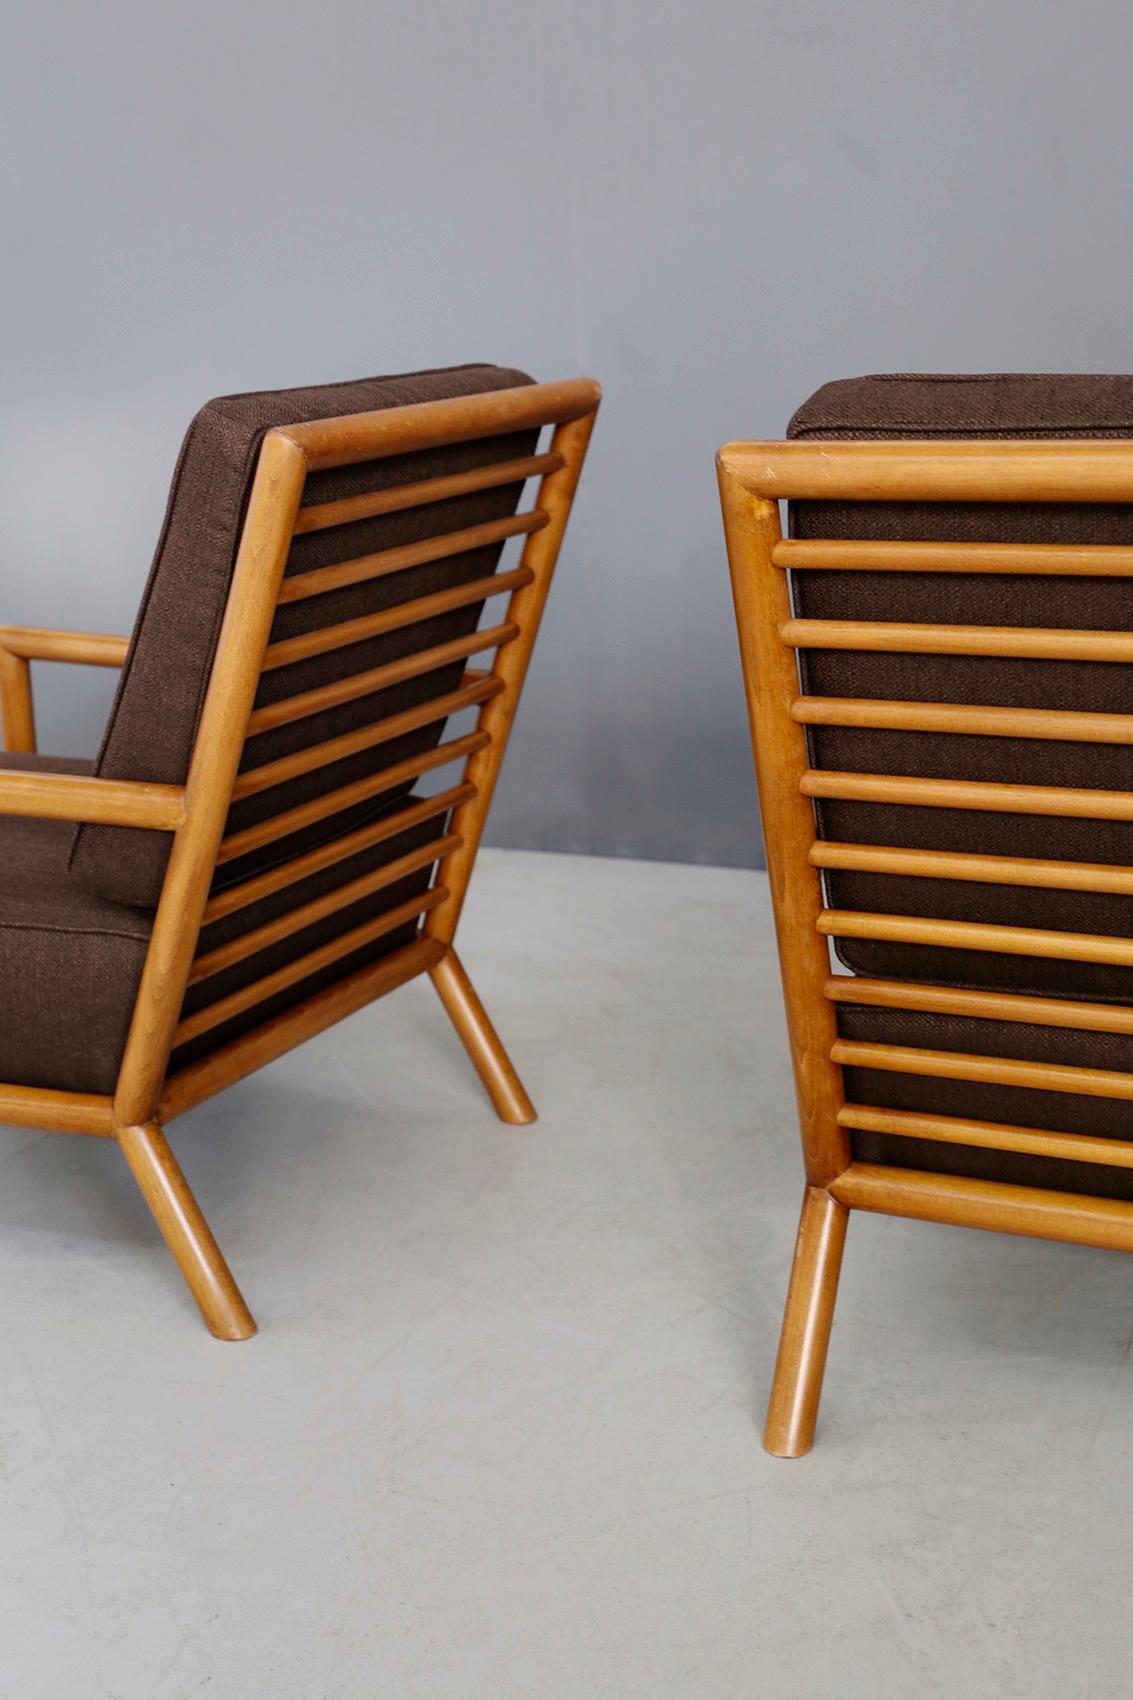 Rare pair of armchairs designed by T.H. Robsjohn-Gibbings in 1950. The armchairs are made of light walnut and have been restored. The backrest is made of tubular wooden slats to make the seat much more solid and comfortable. Its very linear and